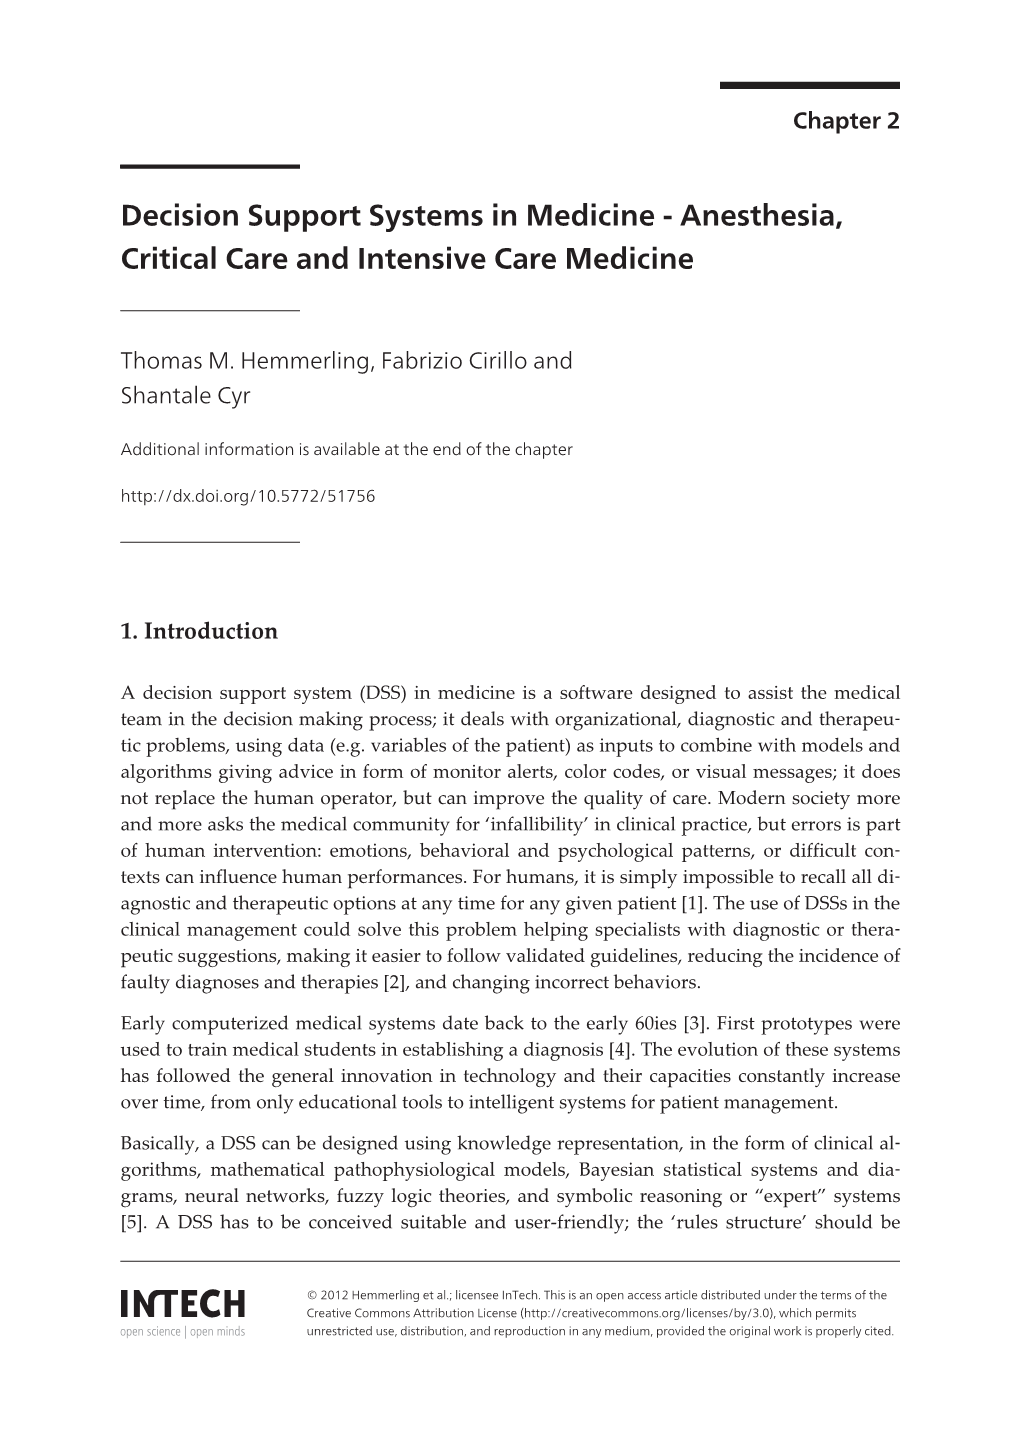 Decision Support Systems in Medicine - Anesthesia, Critical Care and Intensive Care Medicine